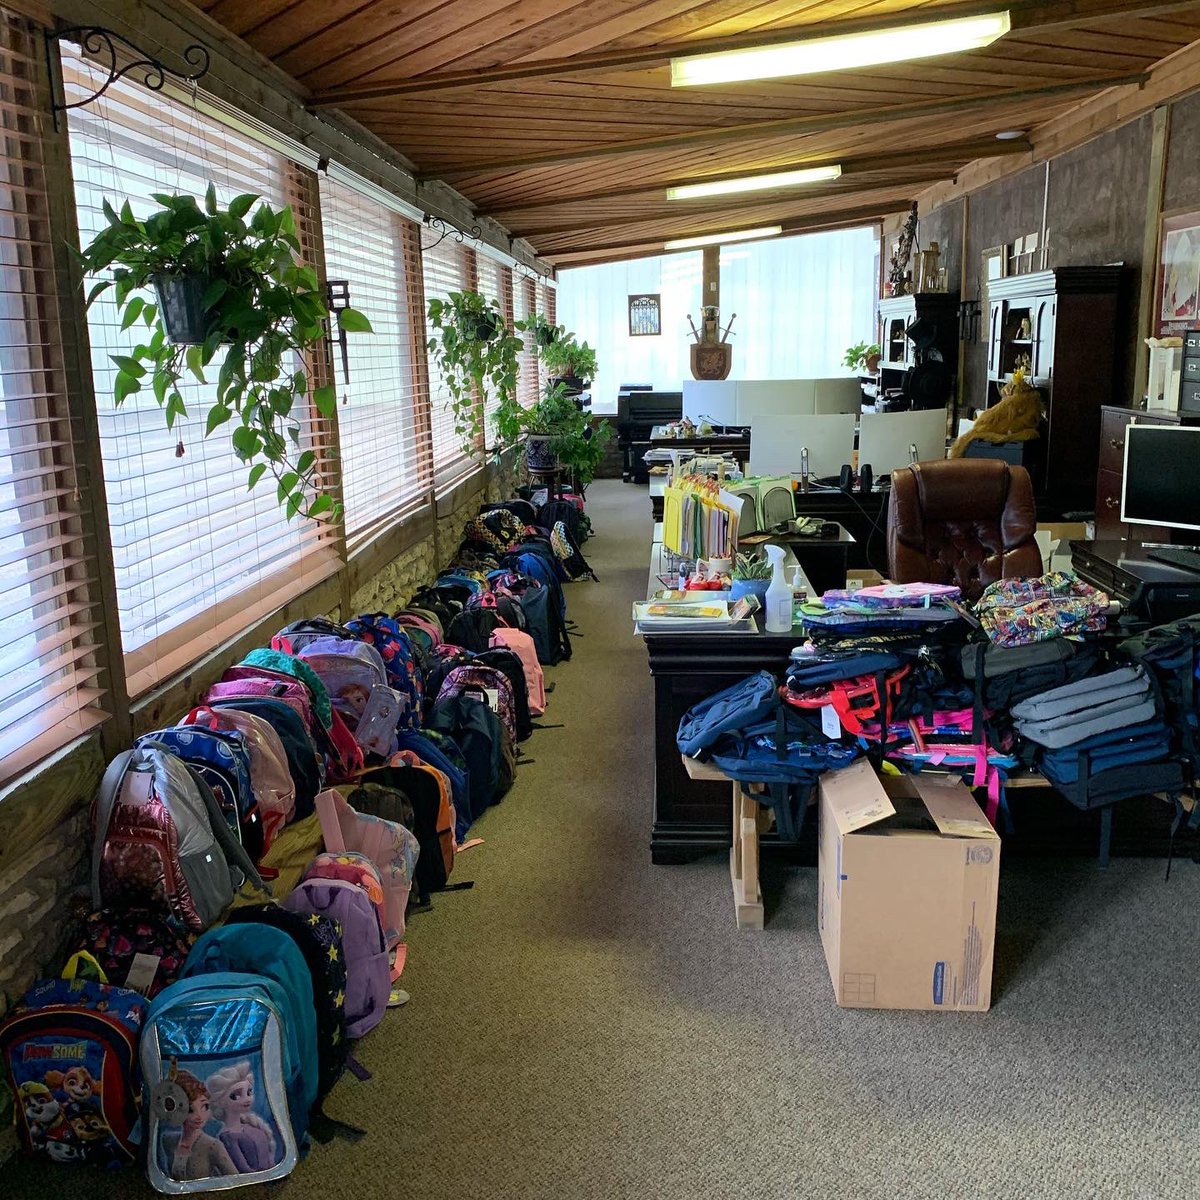 Over 150 backpacks and supplies collected by the TRF Ambassadors that will be donated to students in Grimes County! #texrenfest #trfambassadors